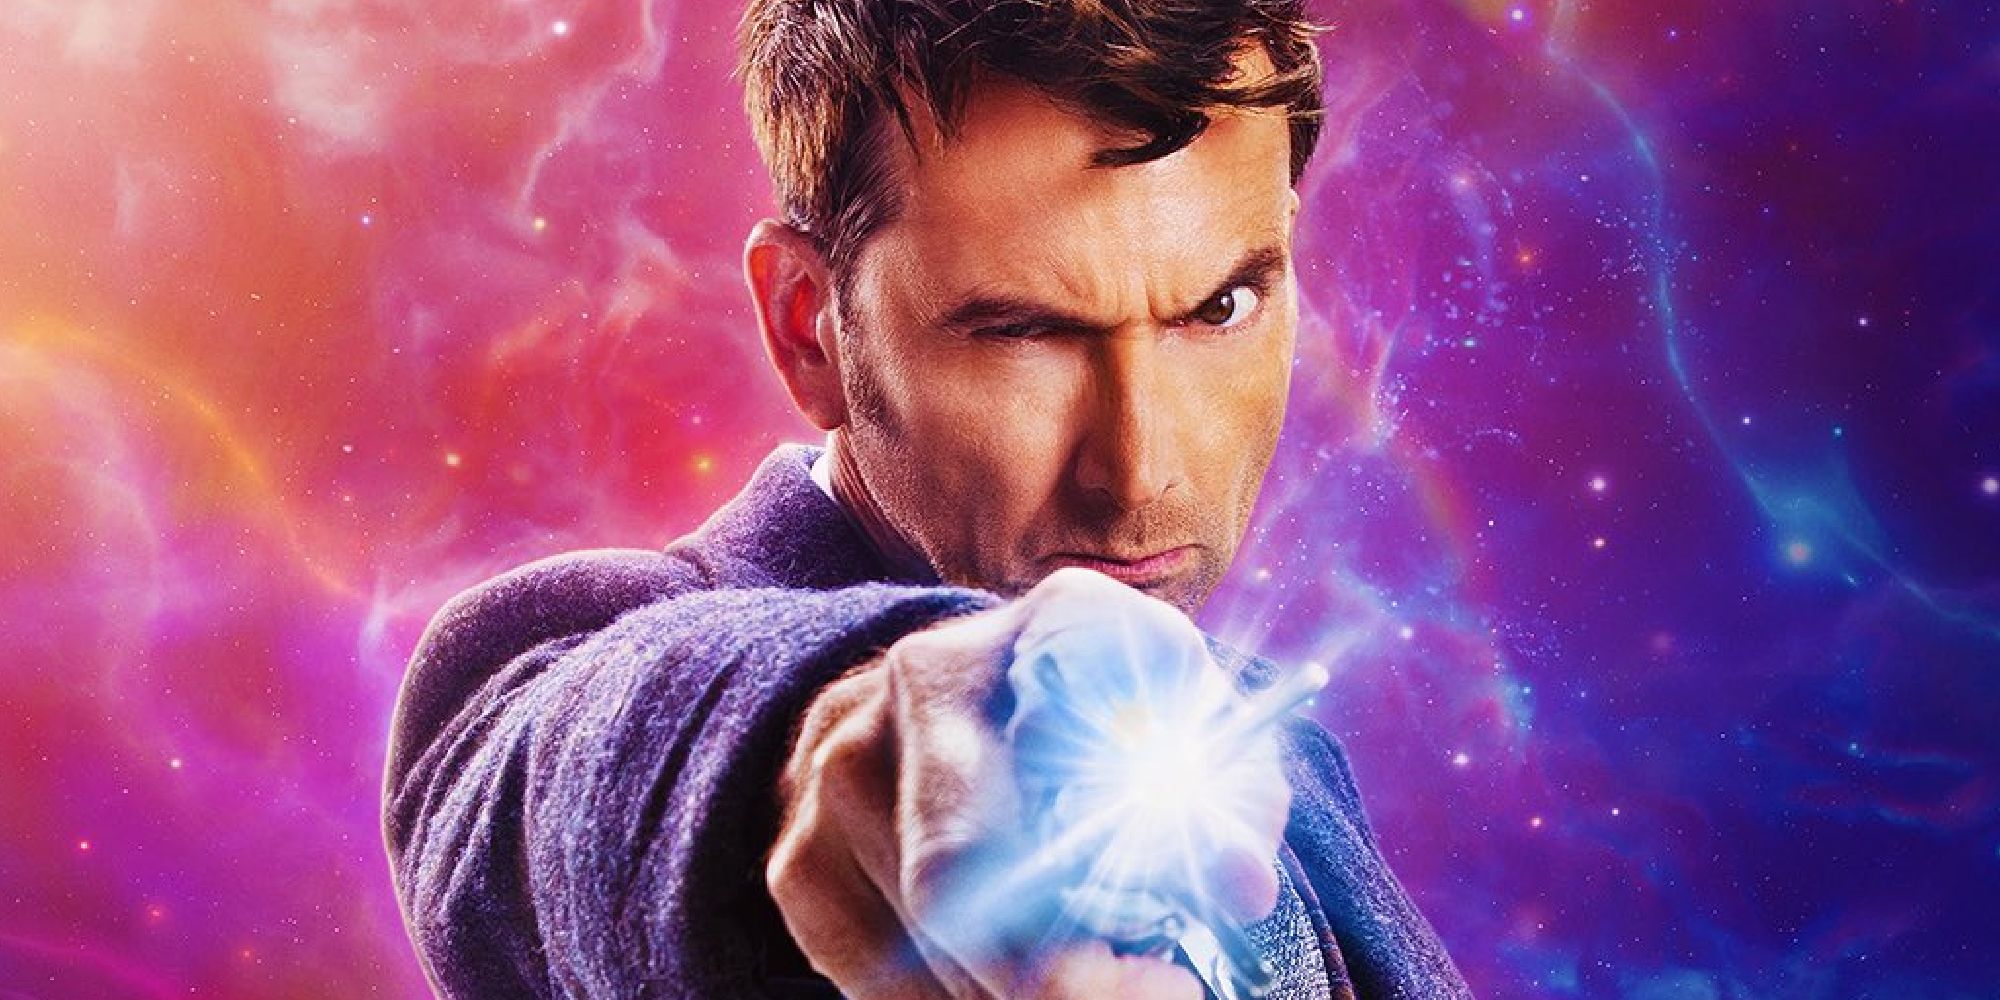 14th Doctor promo for Doctor Who's 60th anniversary, David Tennant pointing the sonic at the screen over a blue and purple space background